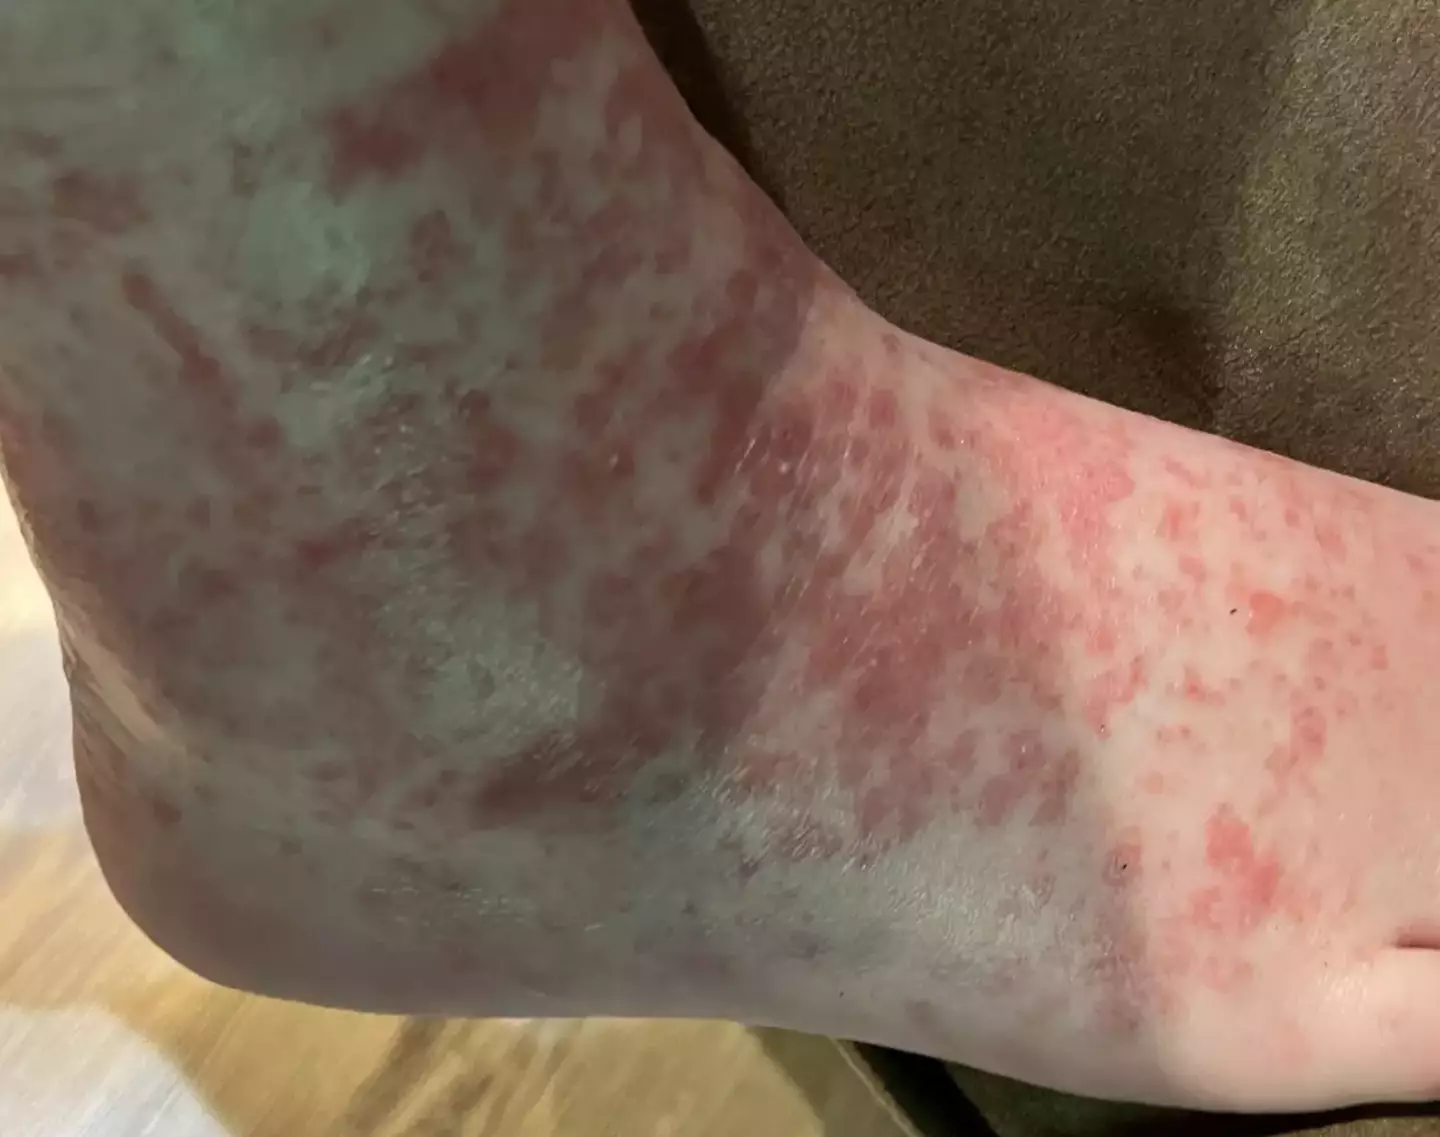 The mum was told the reaction could potentially be scabies.